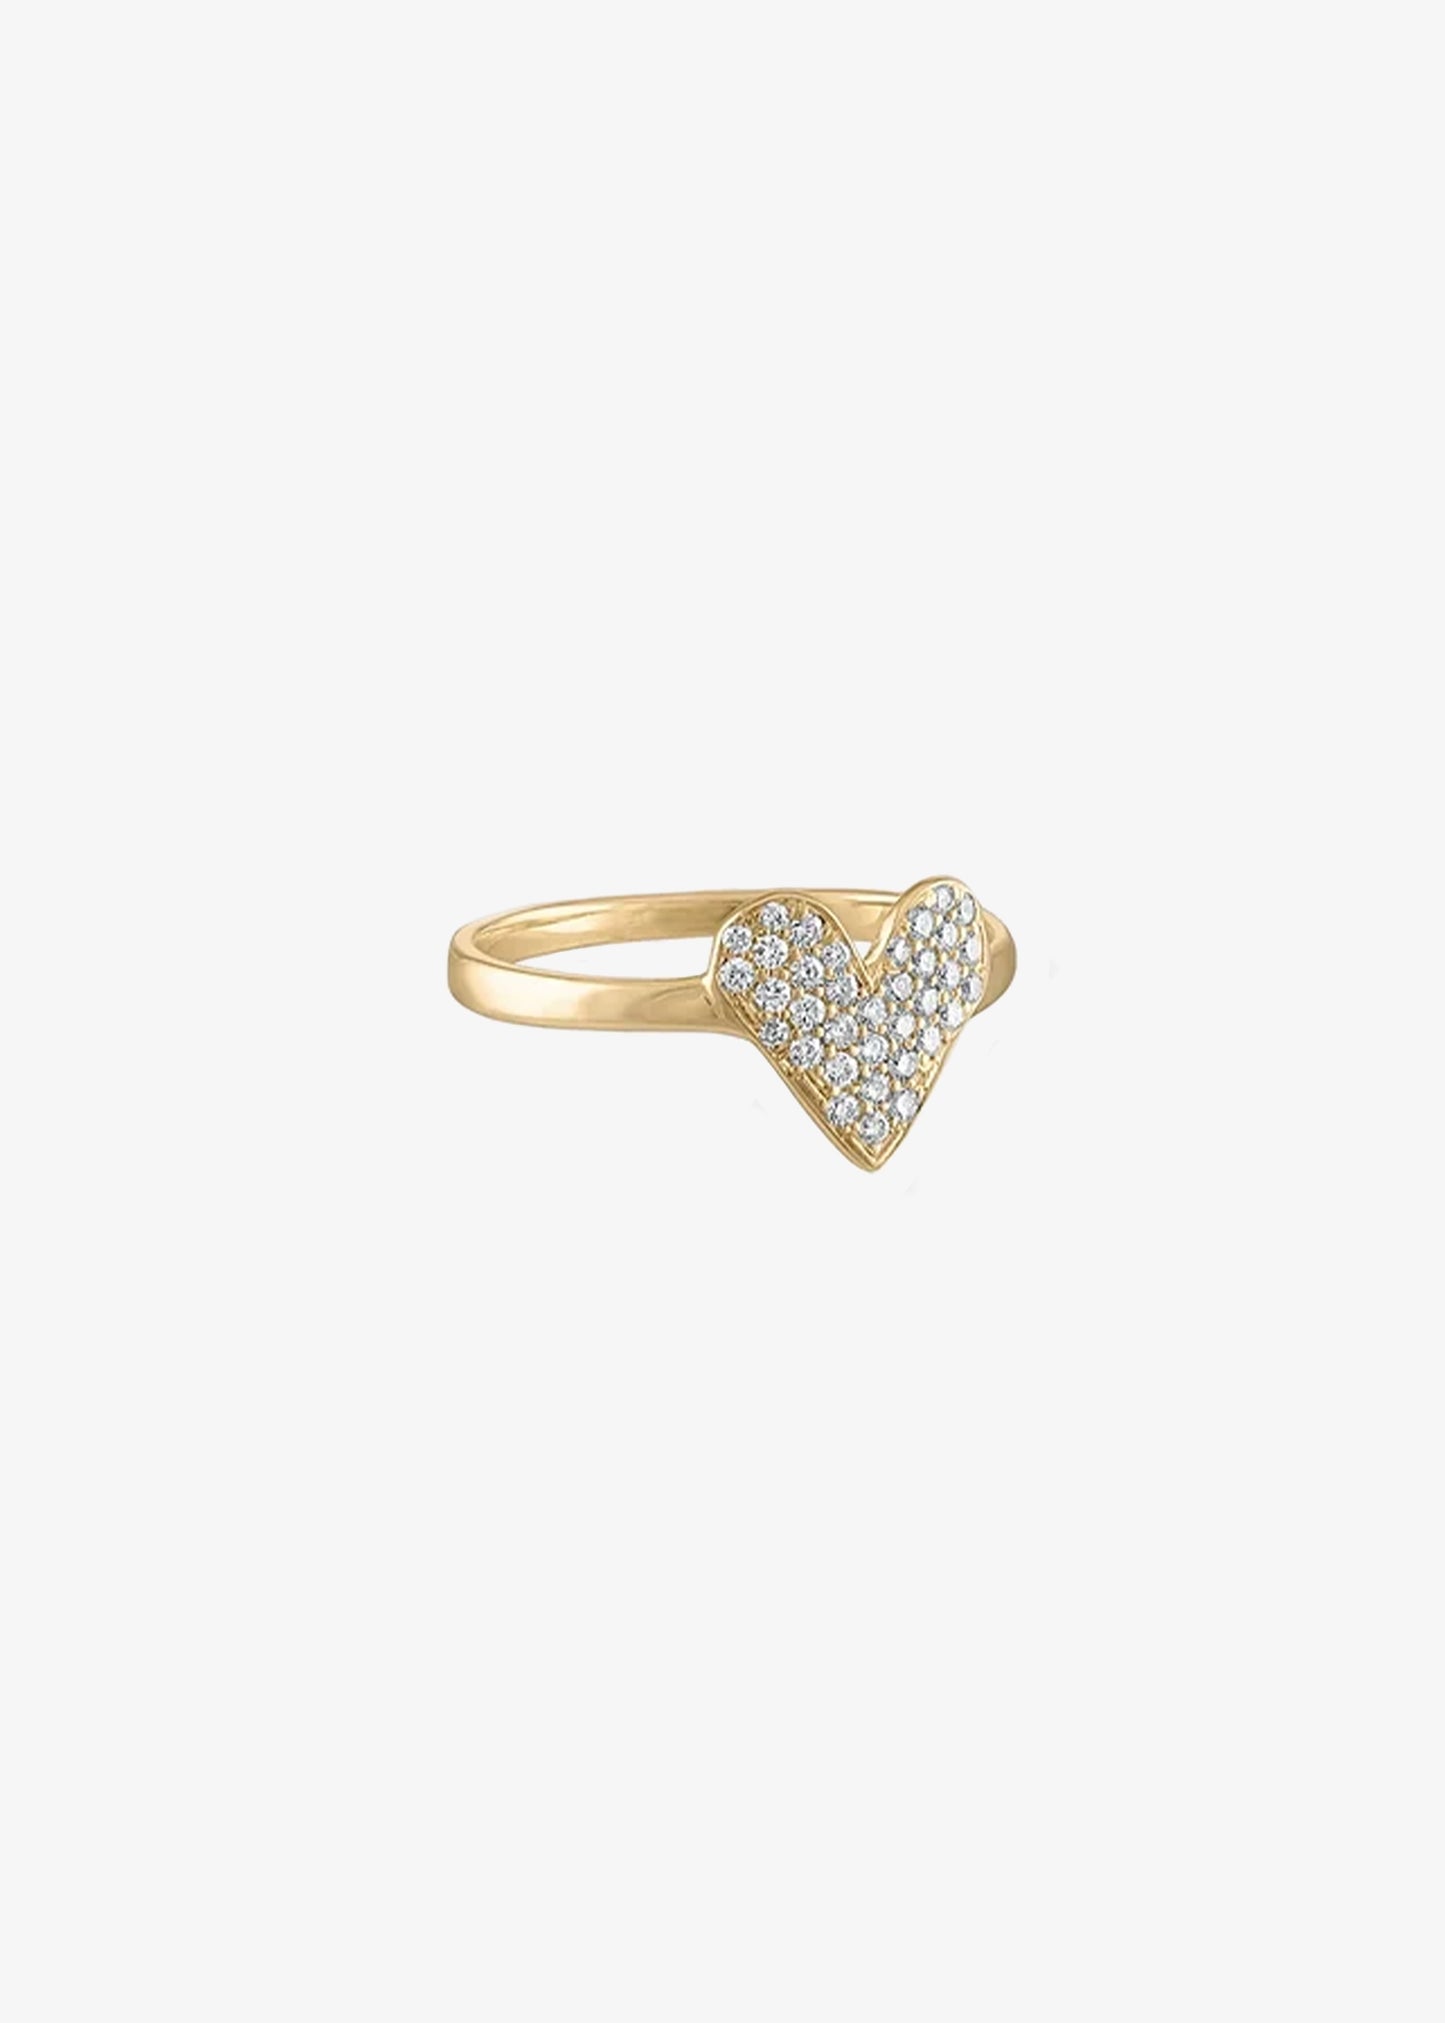 Asia-Ingalls-Sweet-Heart-Ring-with-Diamonds